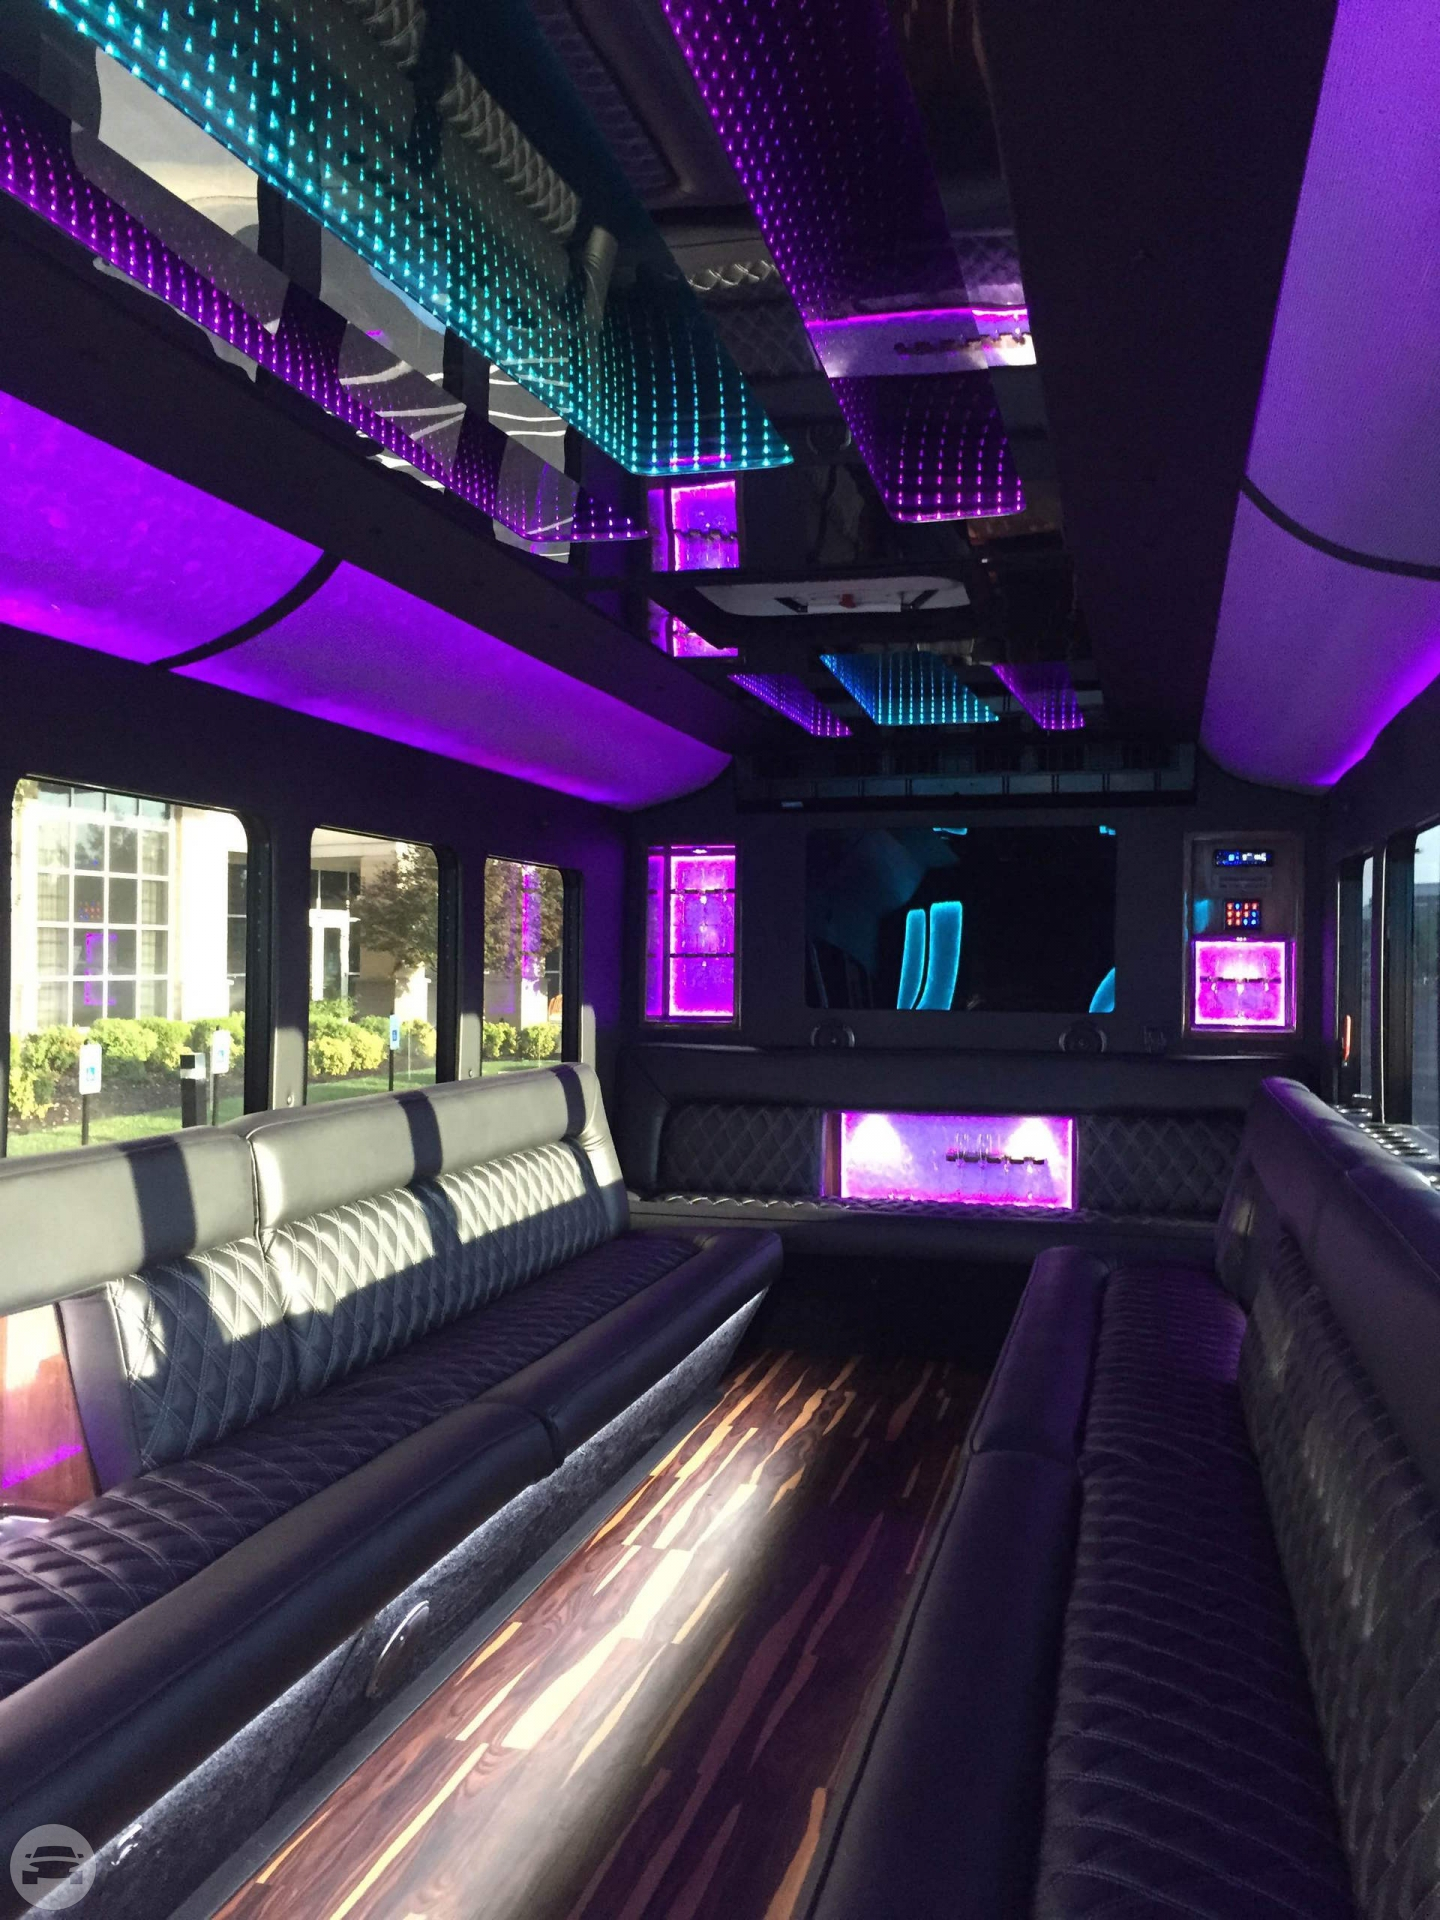 25 Passenger Party Limo Bus
Party Limo Bus /
Rogers, AR

 / Hourly $0.00
